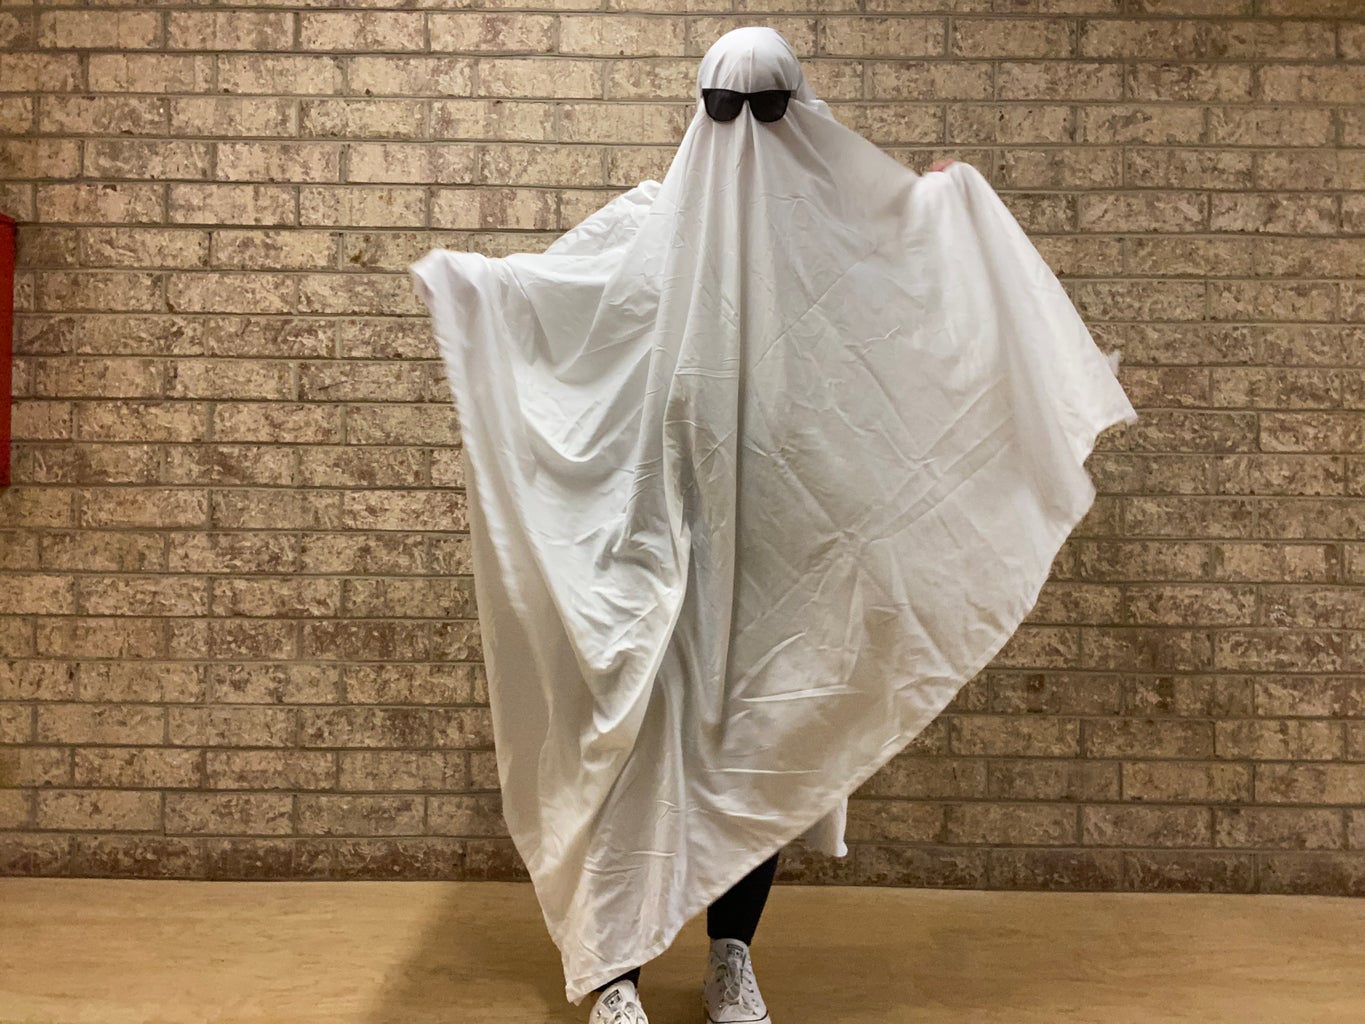 My costume as a ghost